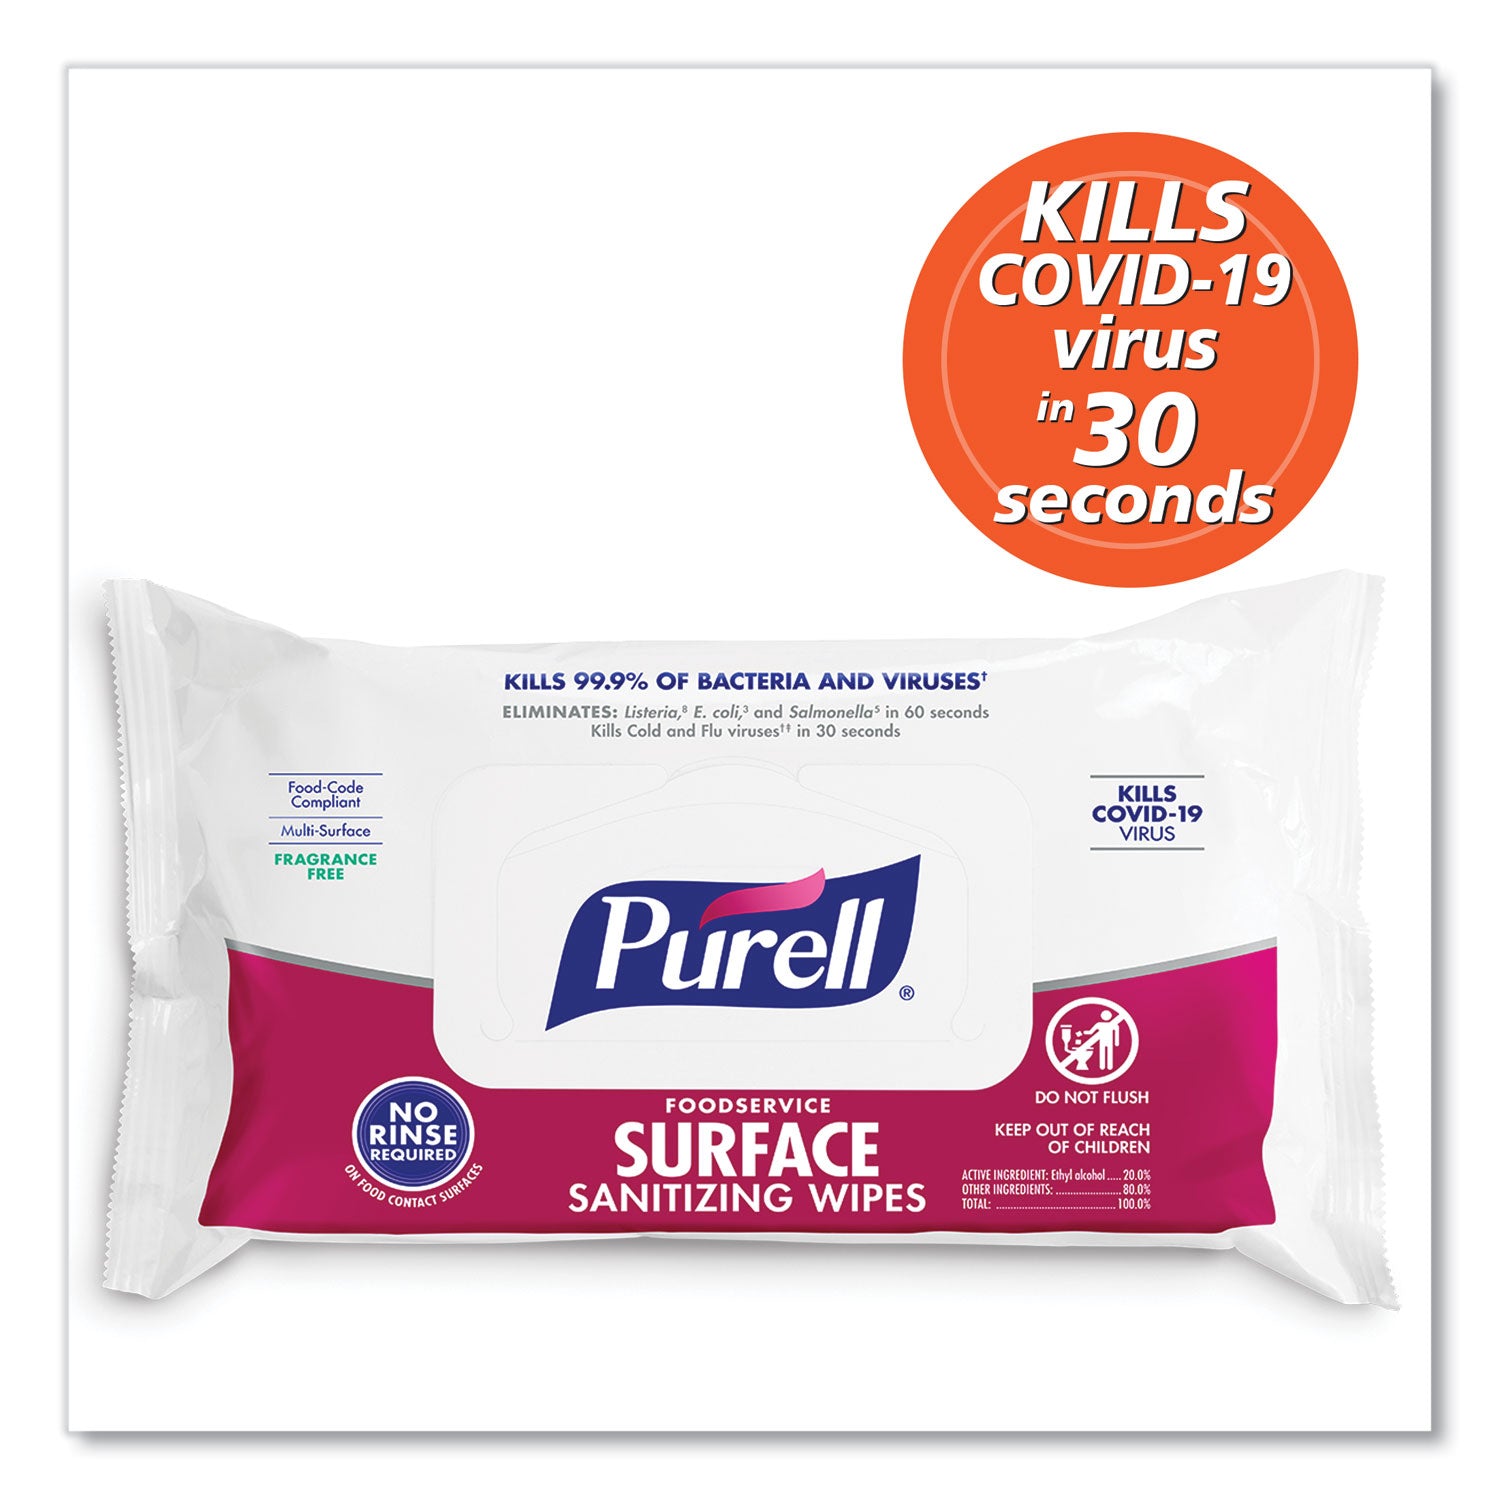 foodservice-surface-sanitizing-wipes-1-ply-74-x-9-fragrance-free-white-72-pouch-12-pouches-carton_goj937112ct - 4